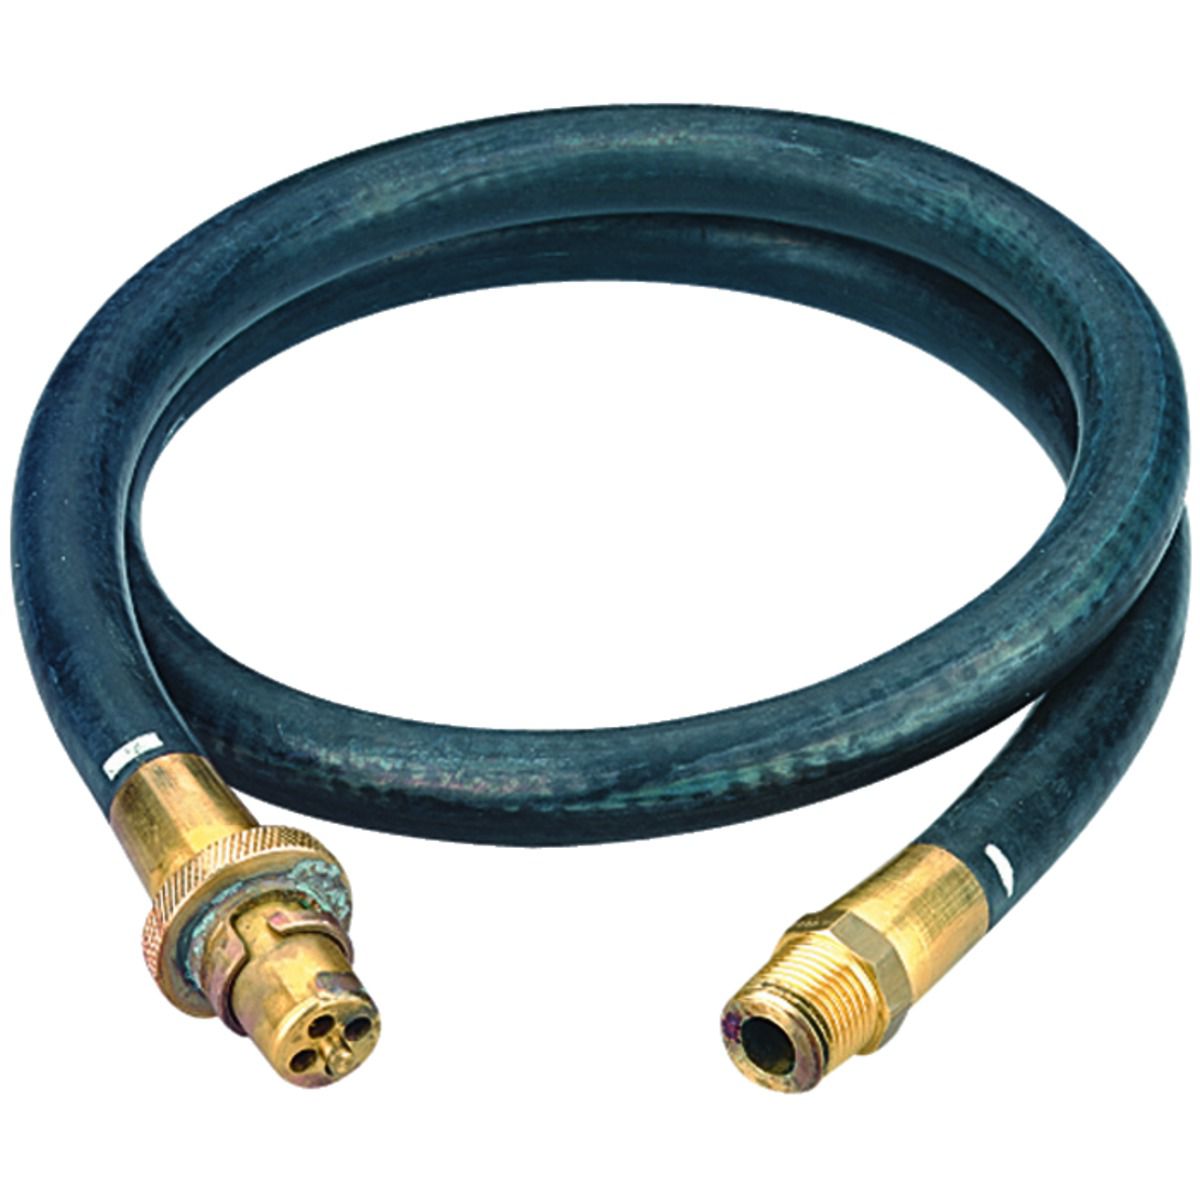 Primaflow Bayonet Hose For Cookers 12mm X 1.21m